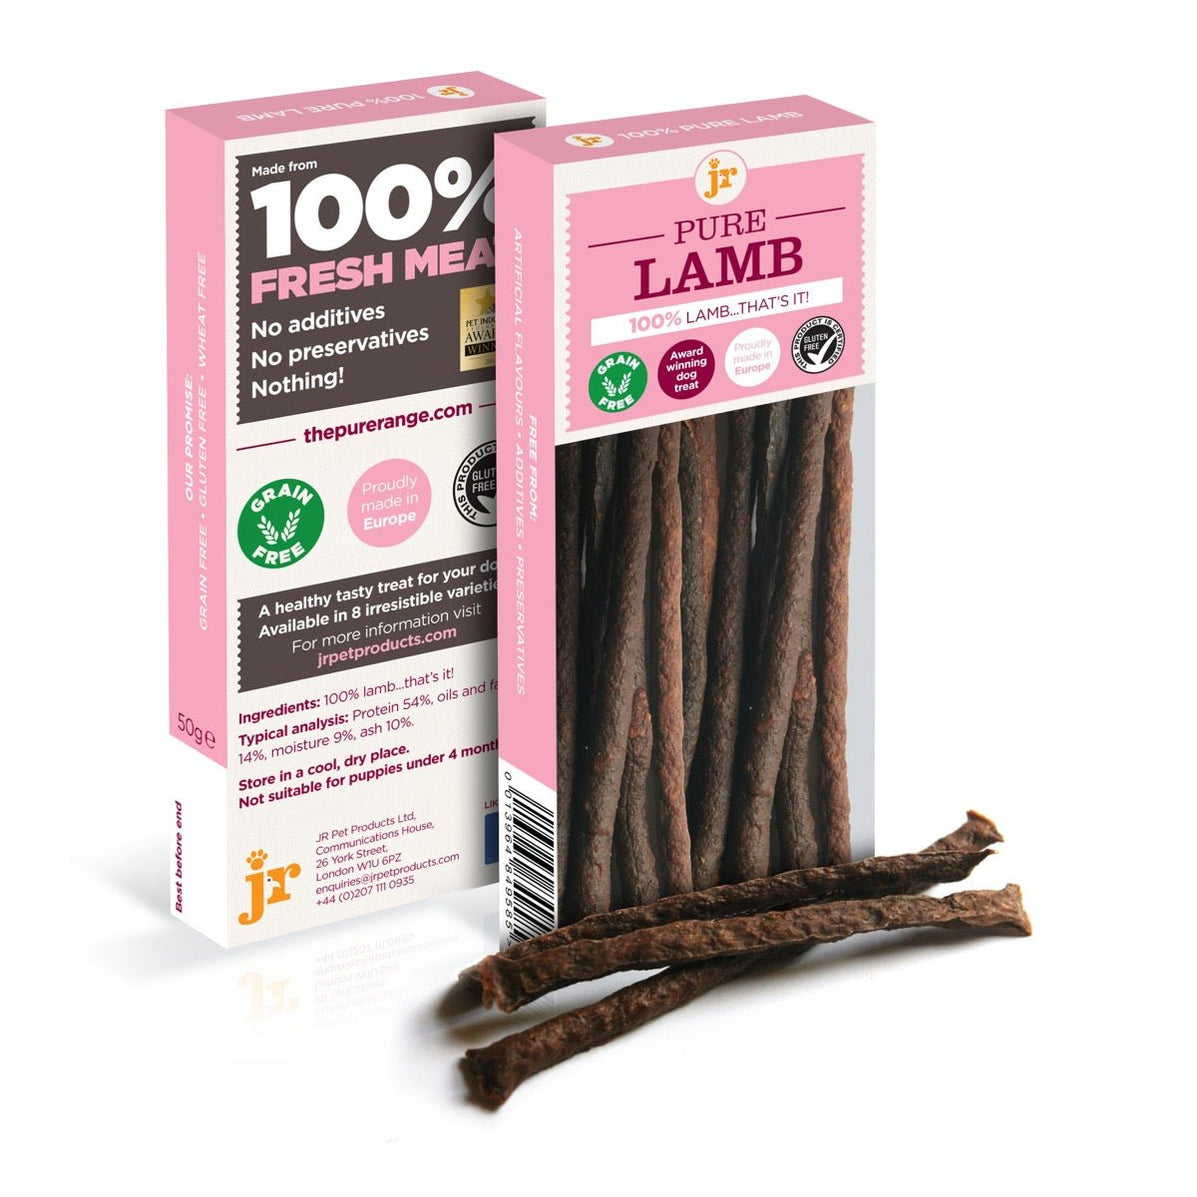 JR Pet Products 100% Pure Lamb Sticks for Dogs made in UK